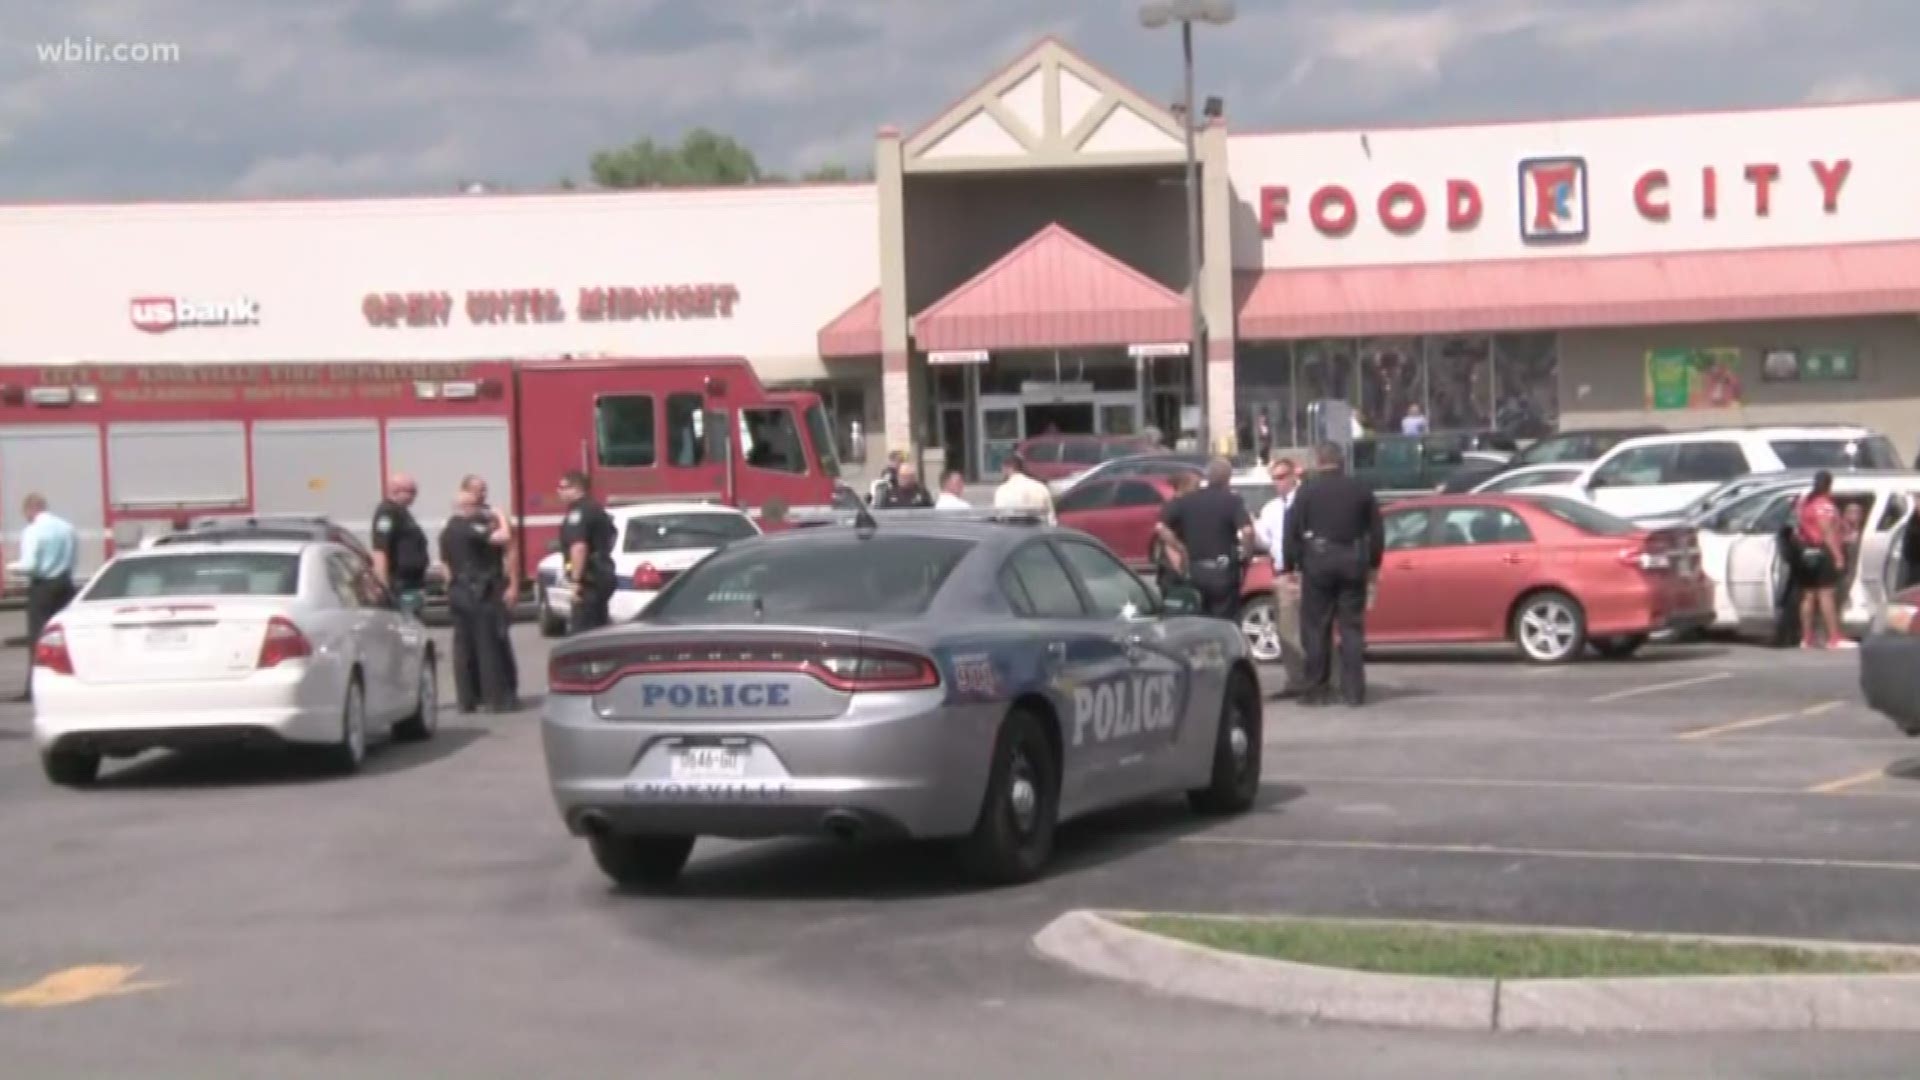 The child was left in a hot car outside Food City.